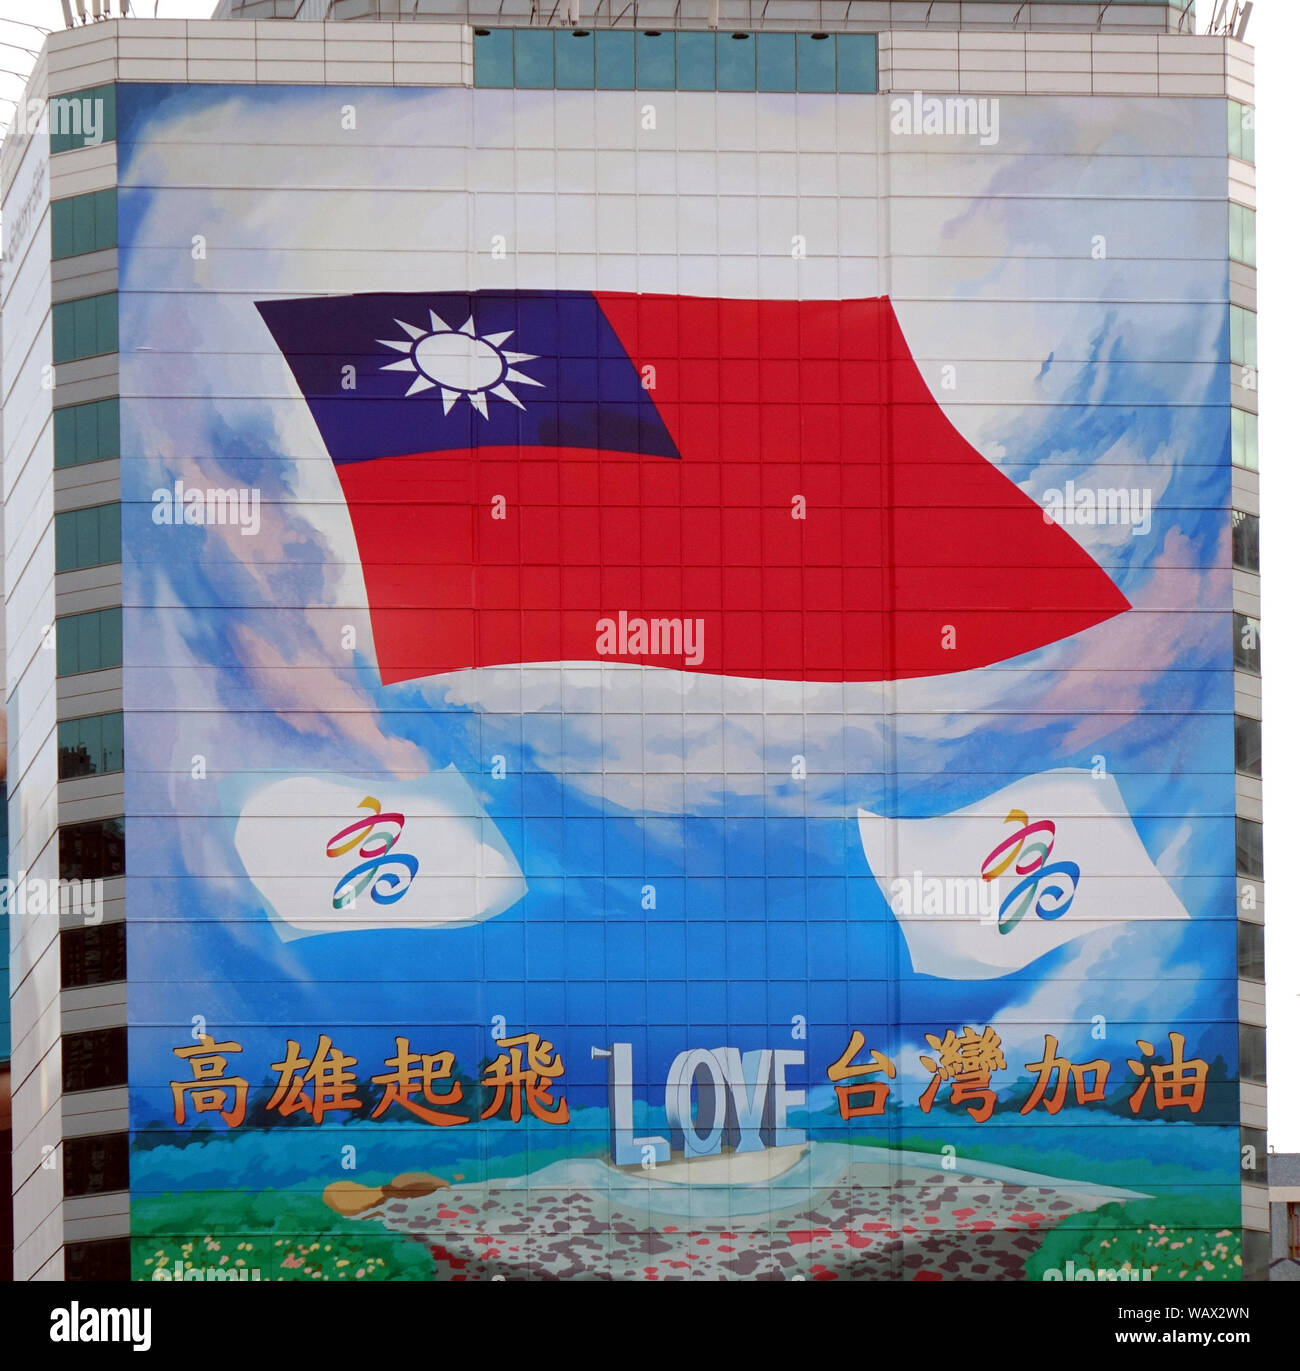 KAOHSIUNG, TAIWAN -- AUGUST 3, 2019: A large advertisement on an office building promoting love for Kaohsiung and Taiwan with the national flag. Stock Photo